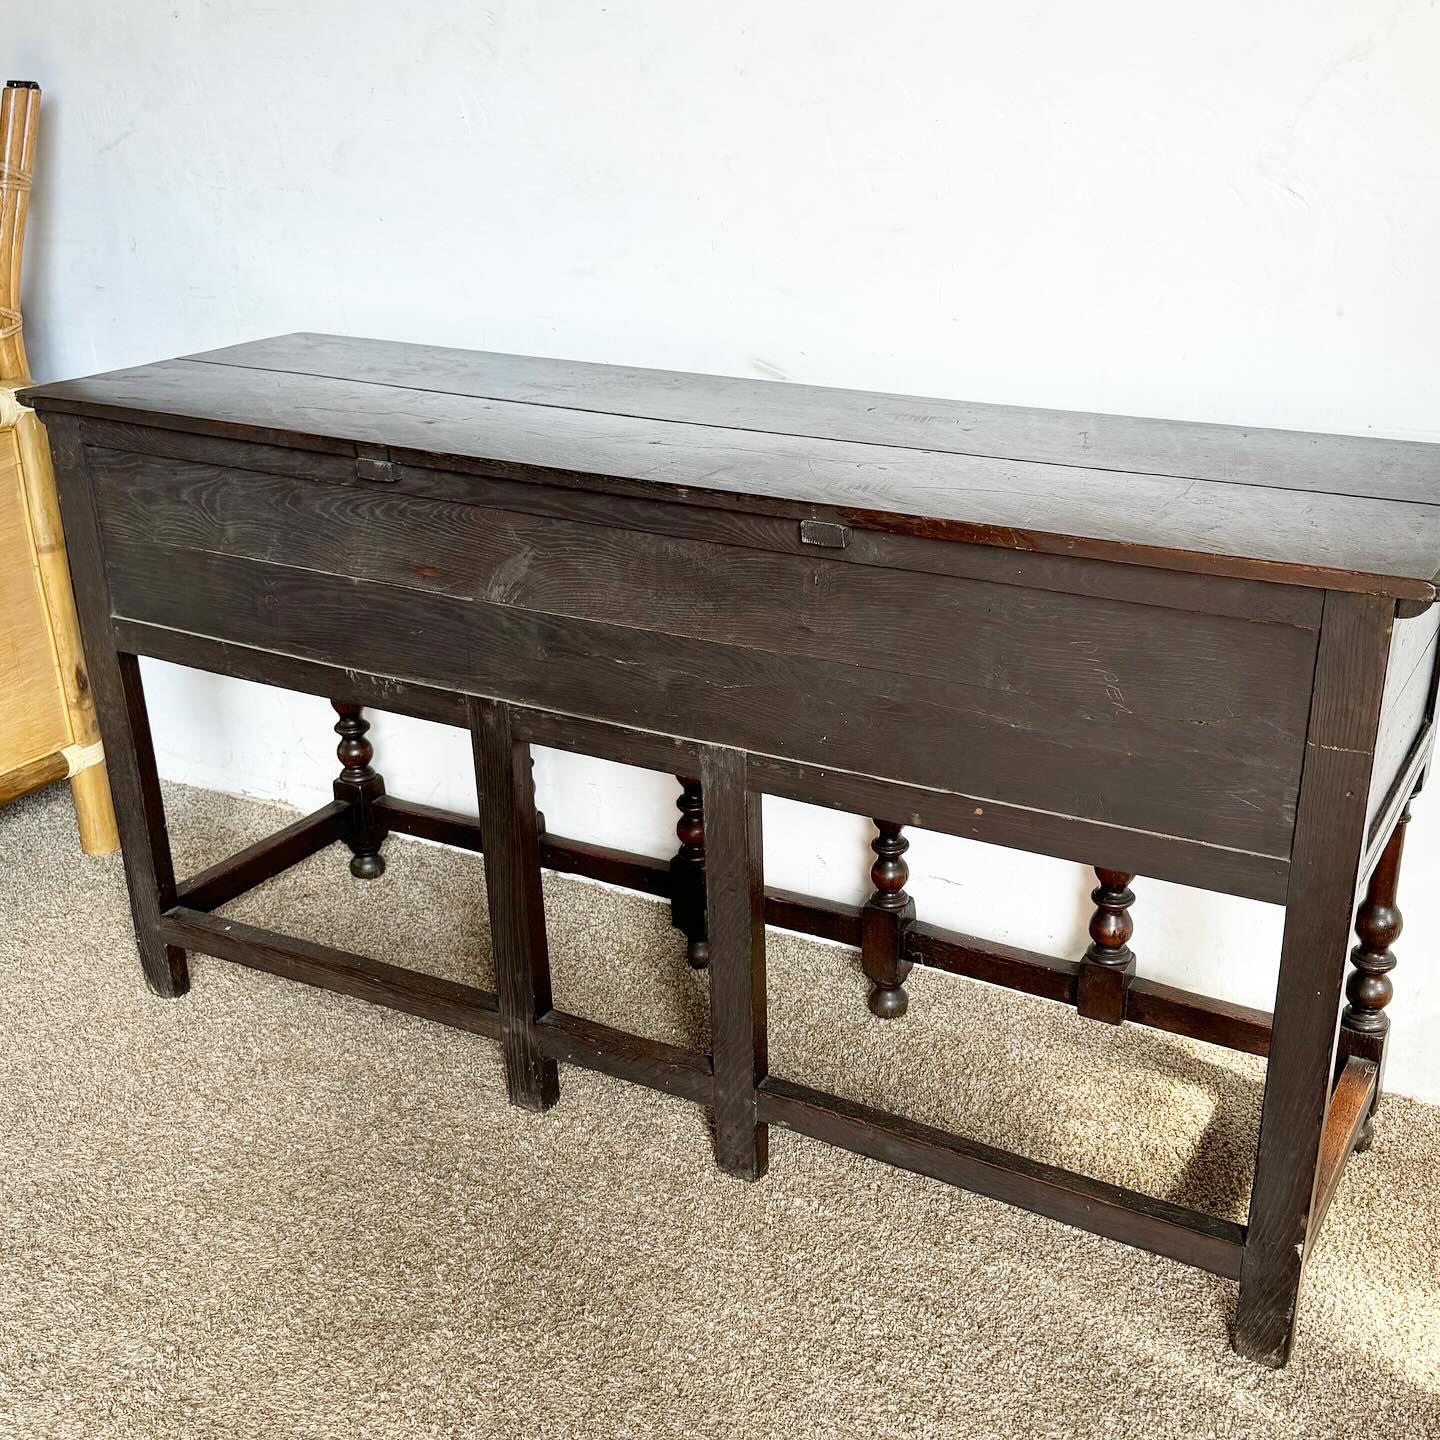 20th Century Antique English Jacobean Style Wooden Credenza/Sideboard For Sale